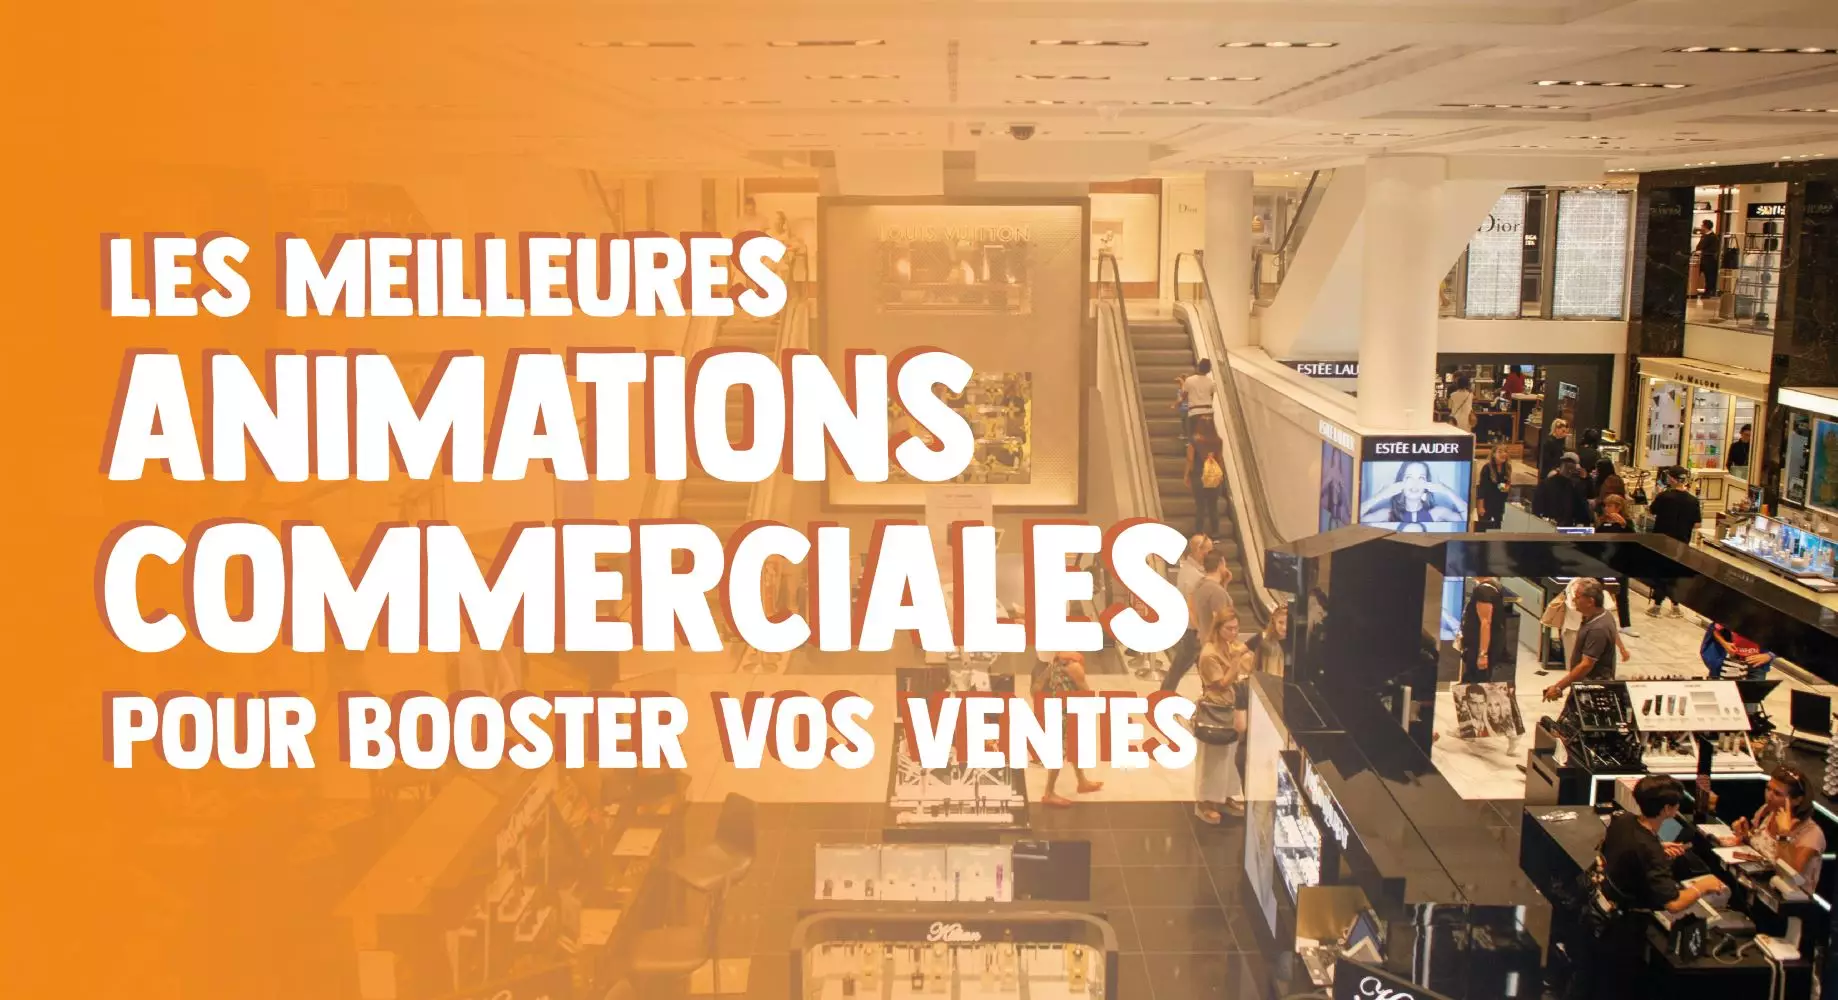 animation commerciale orange booster les ventes grane surface magasin